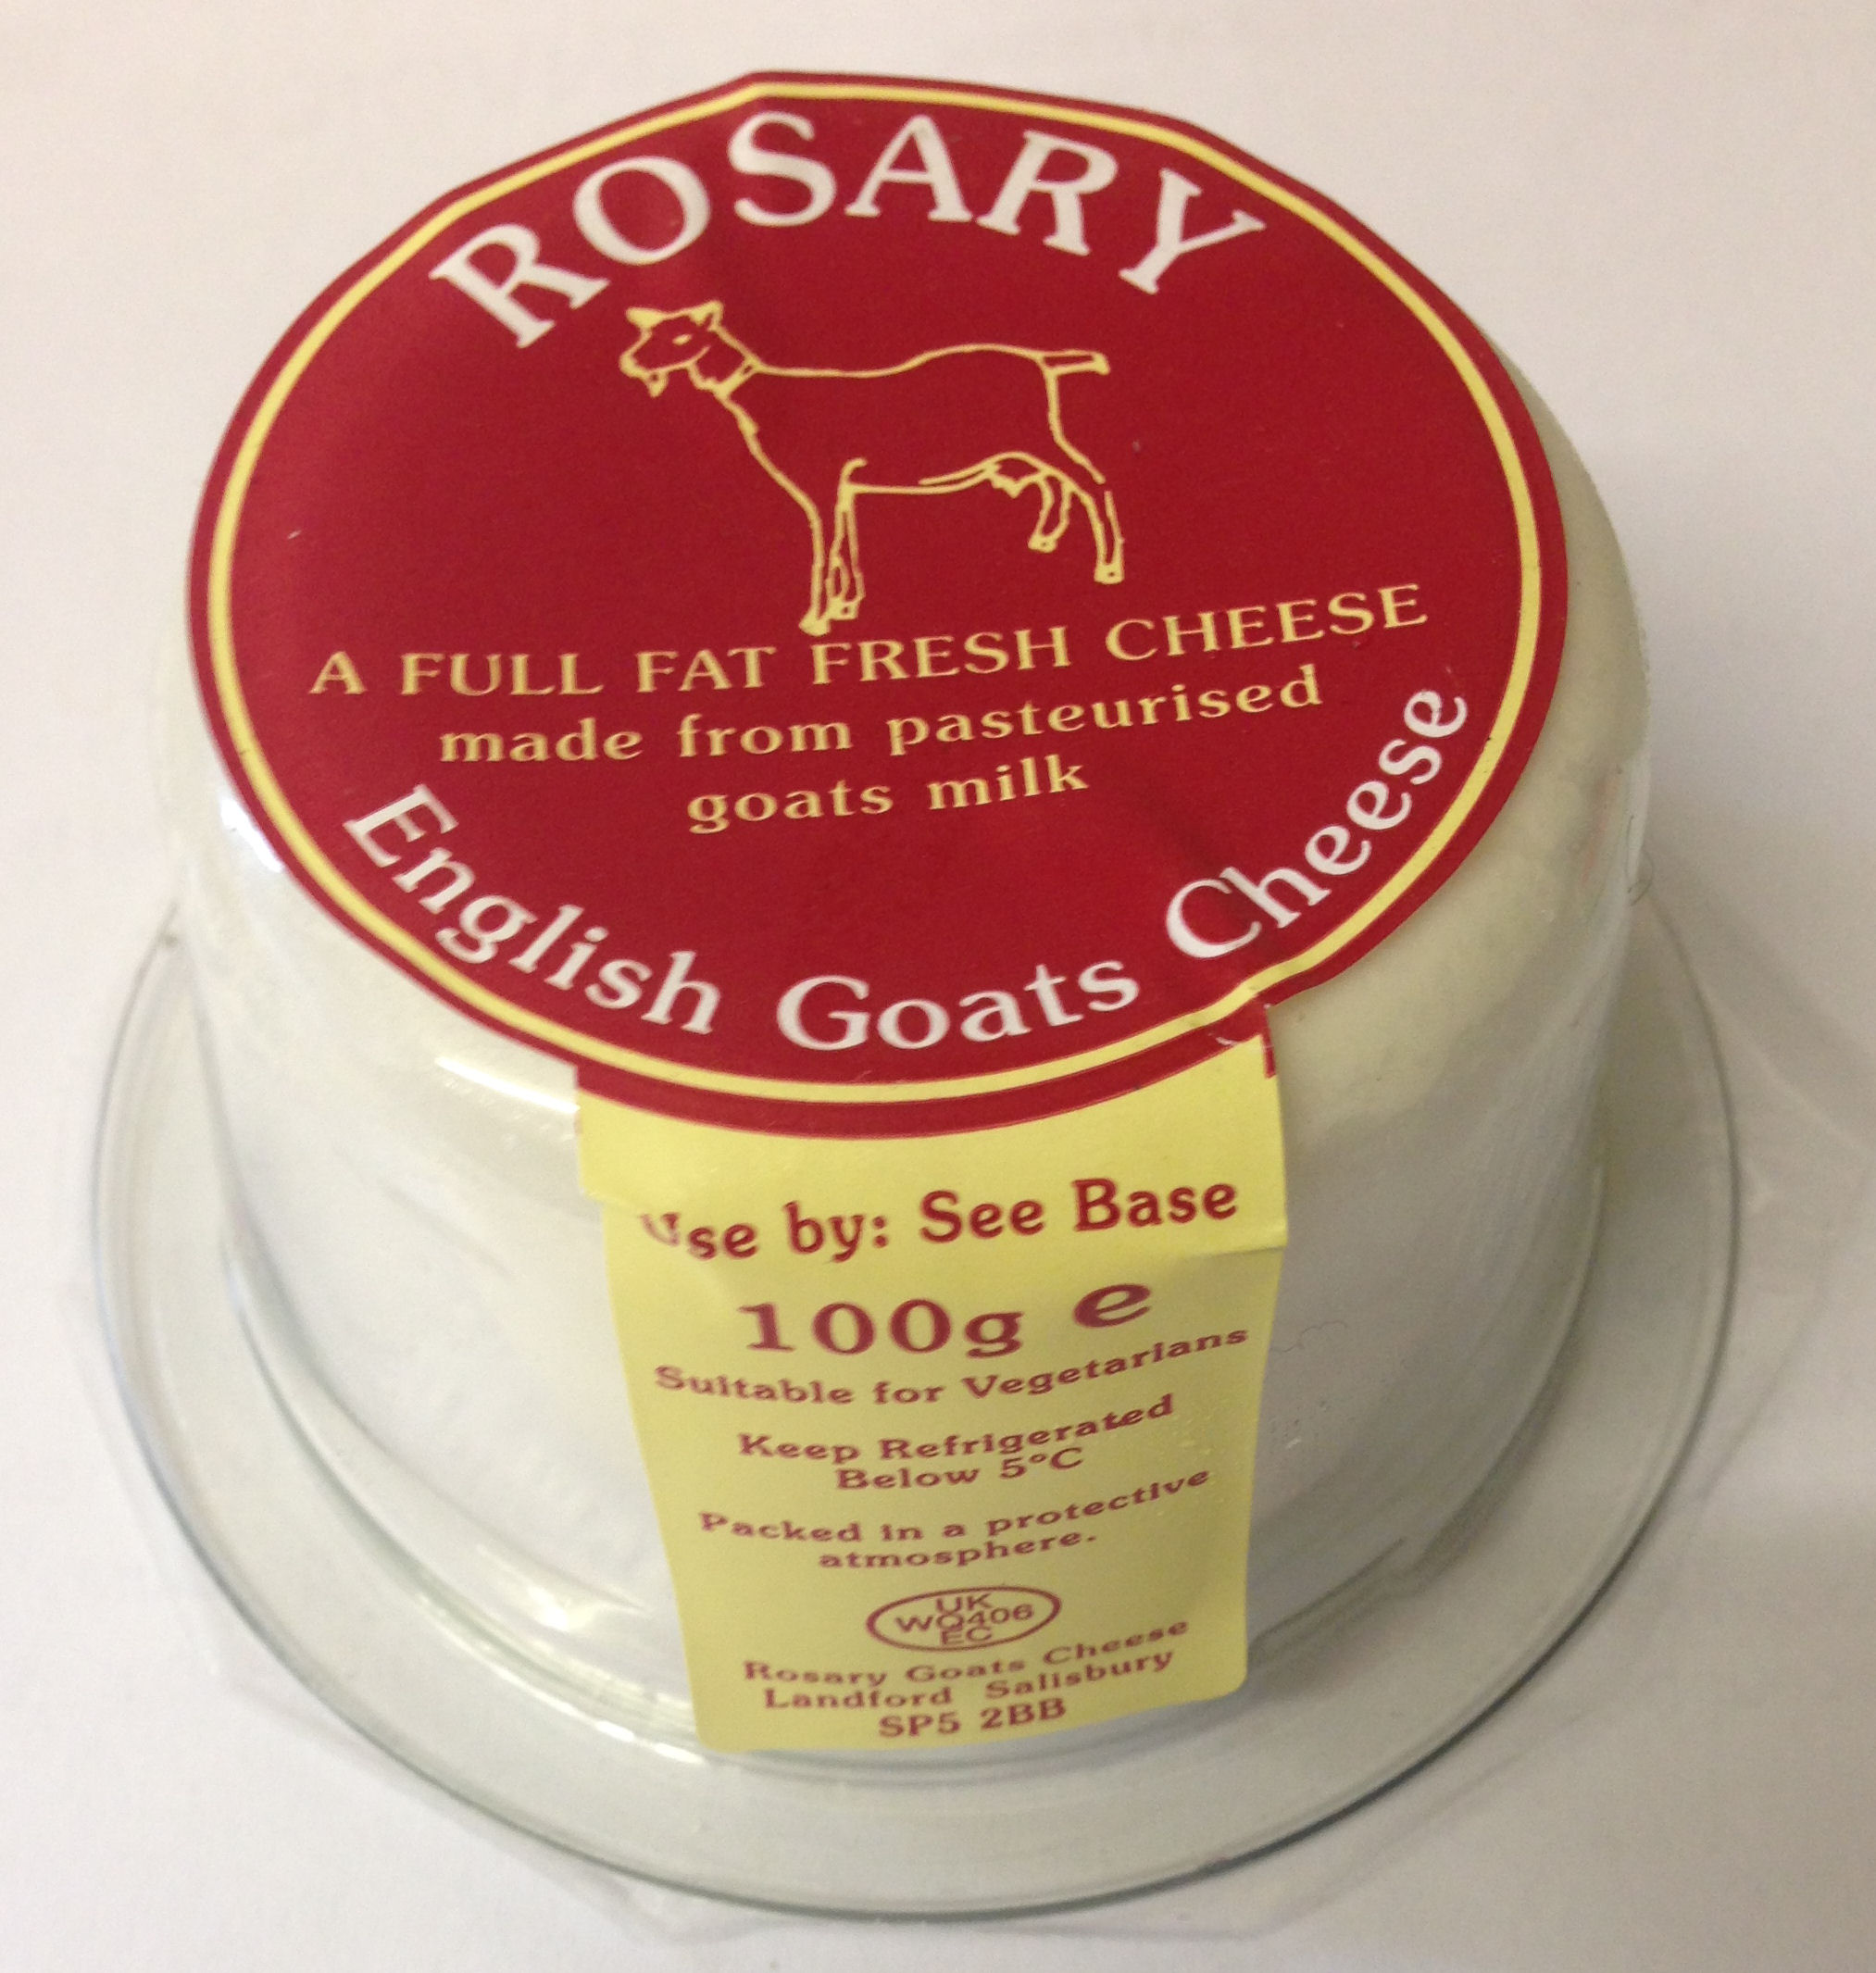 Rosary Goats Cheese 100g